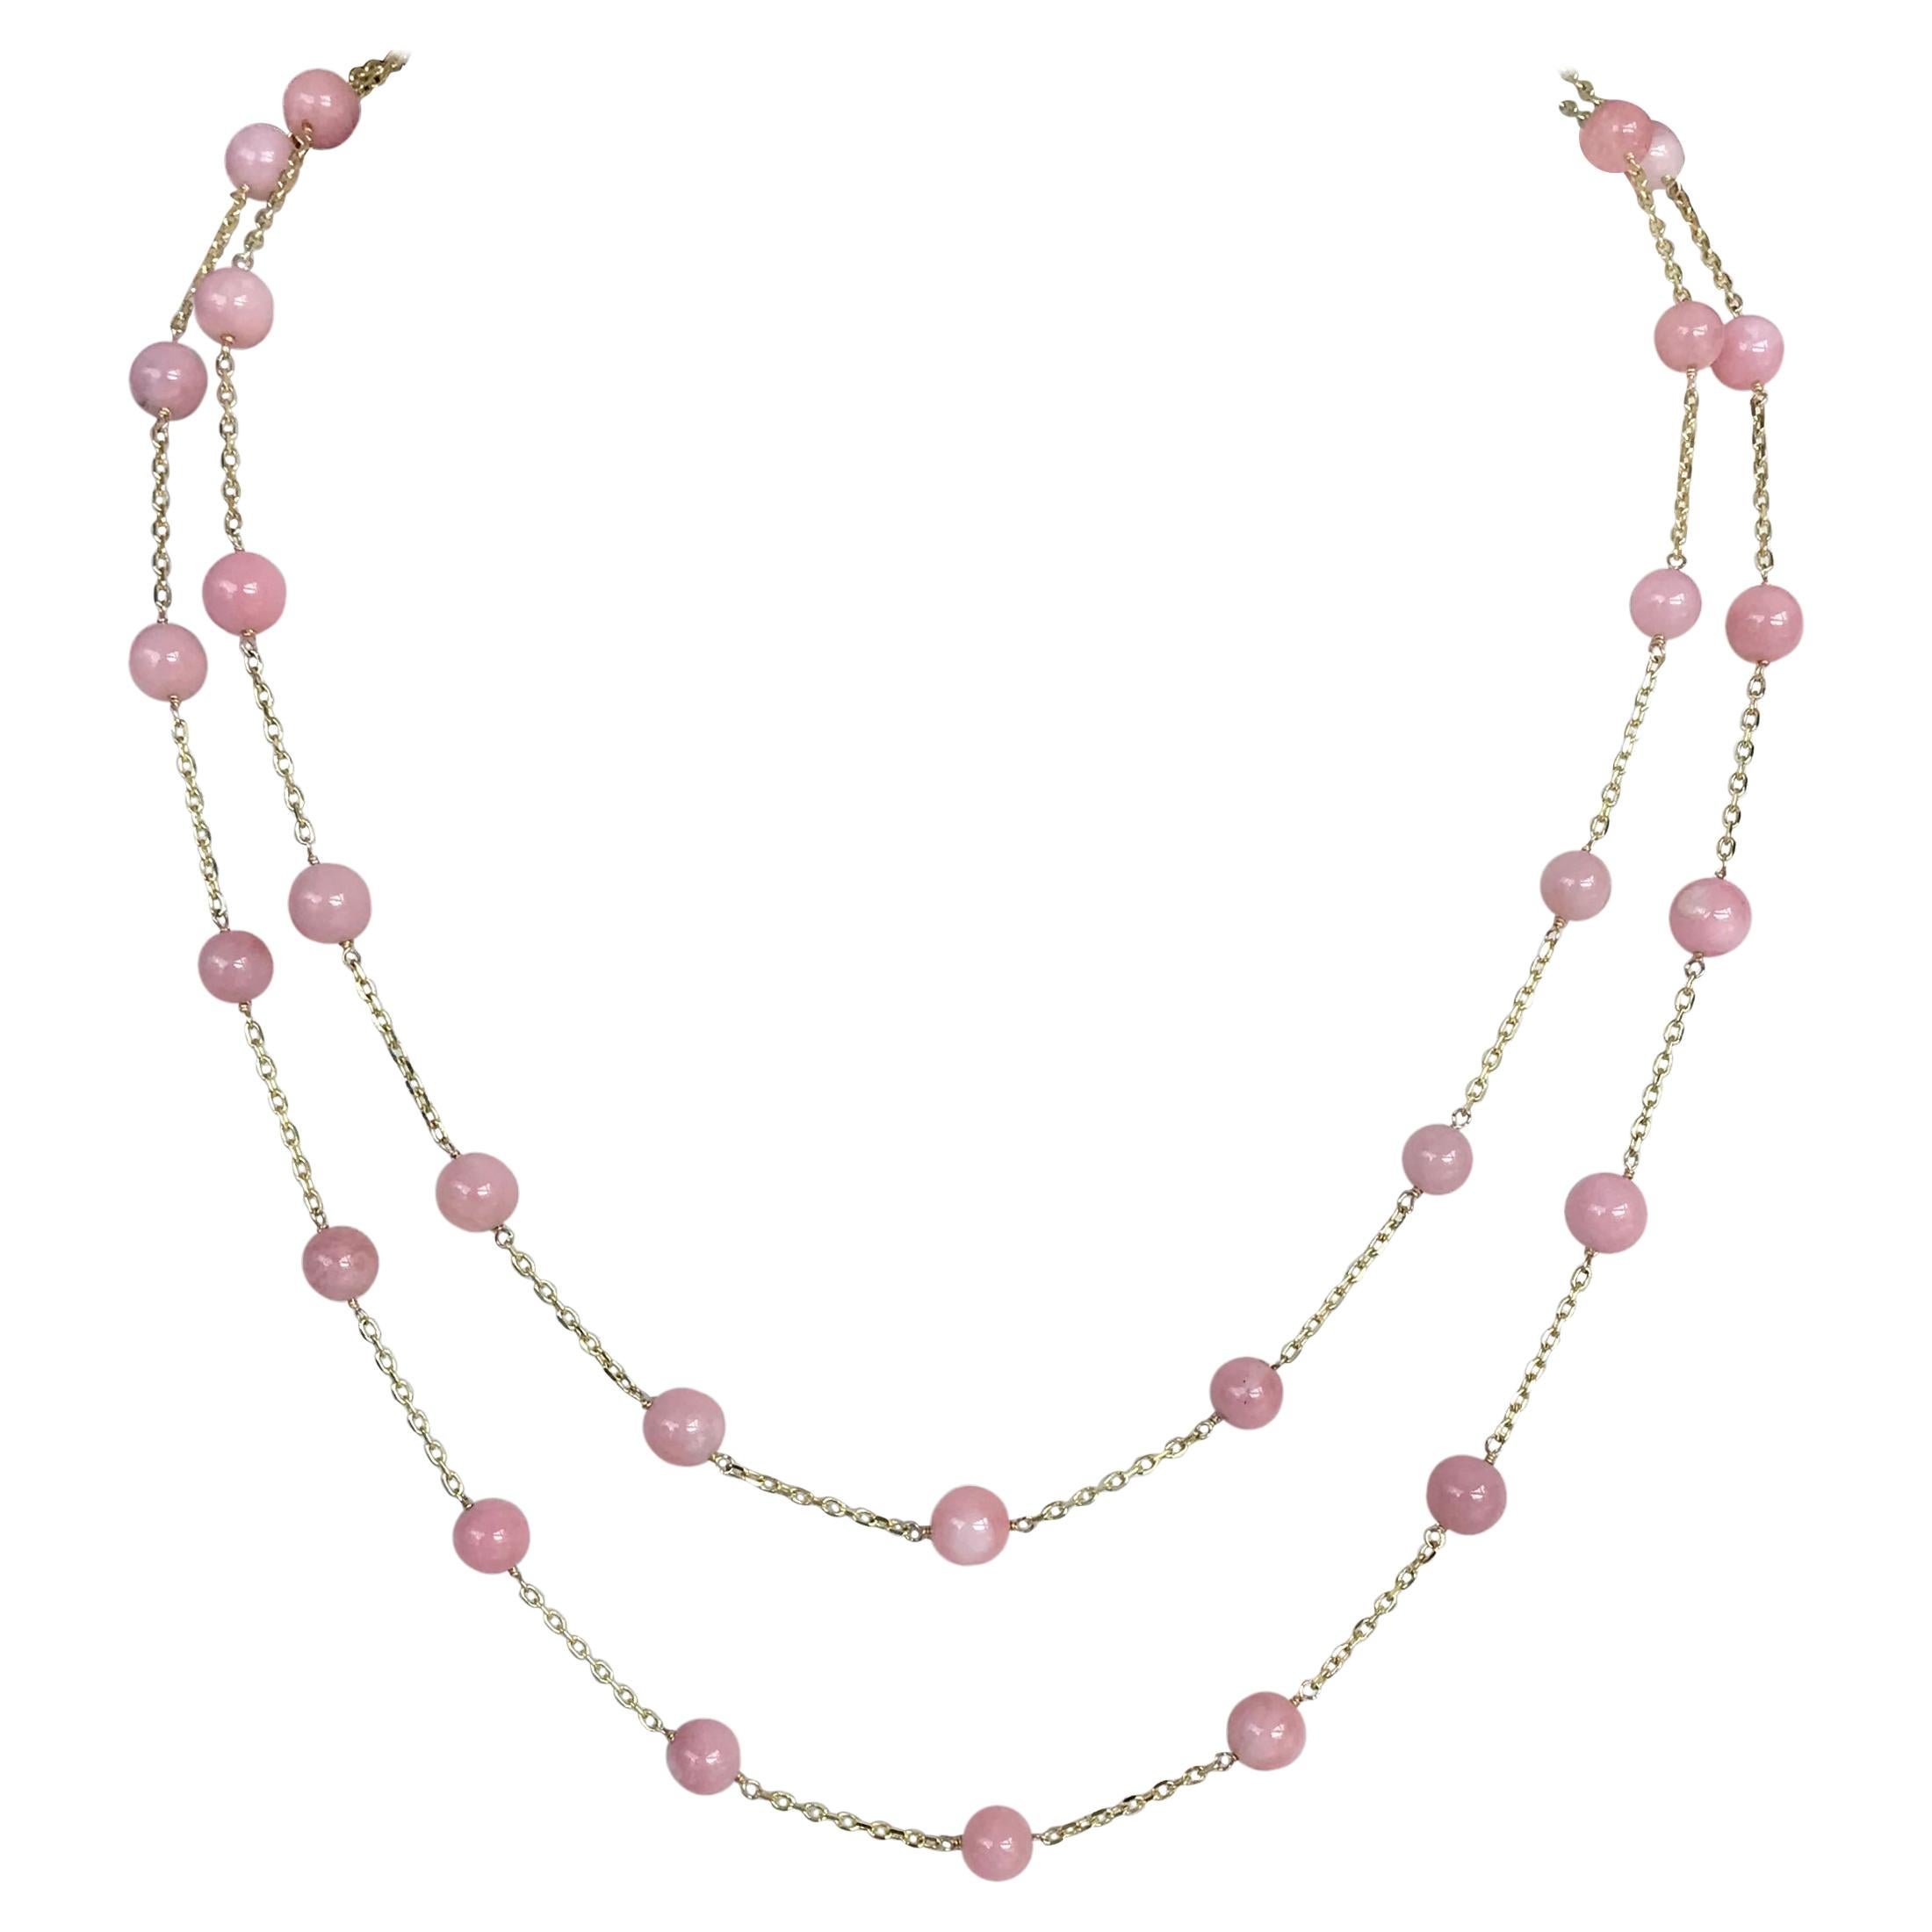  Pink Opal Beads Station Chain Necklace in 14 Karat Gold